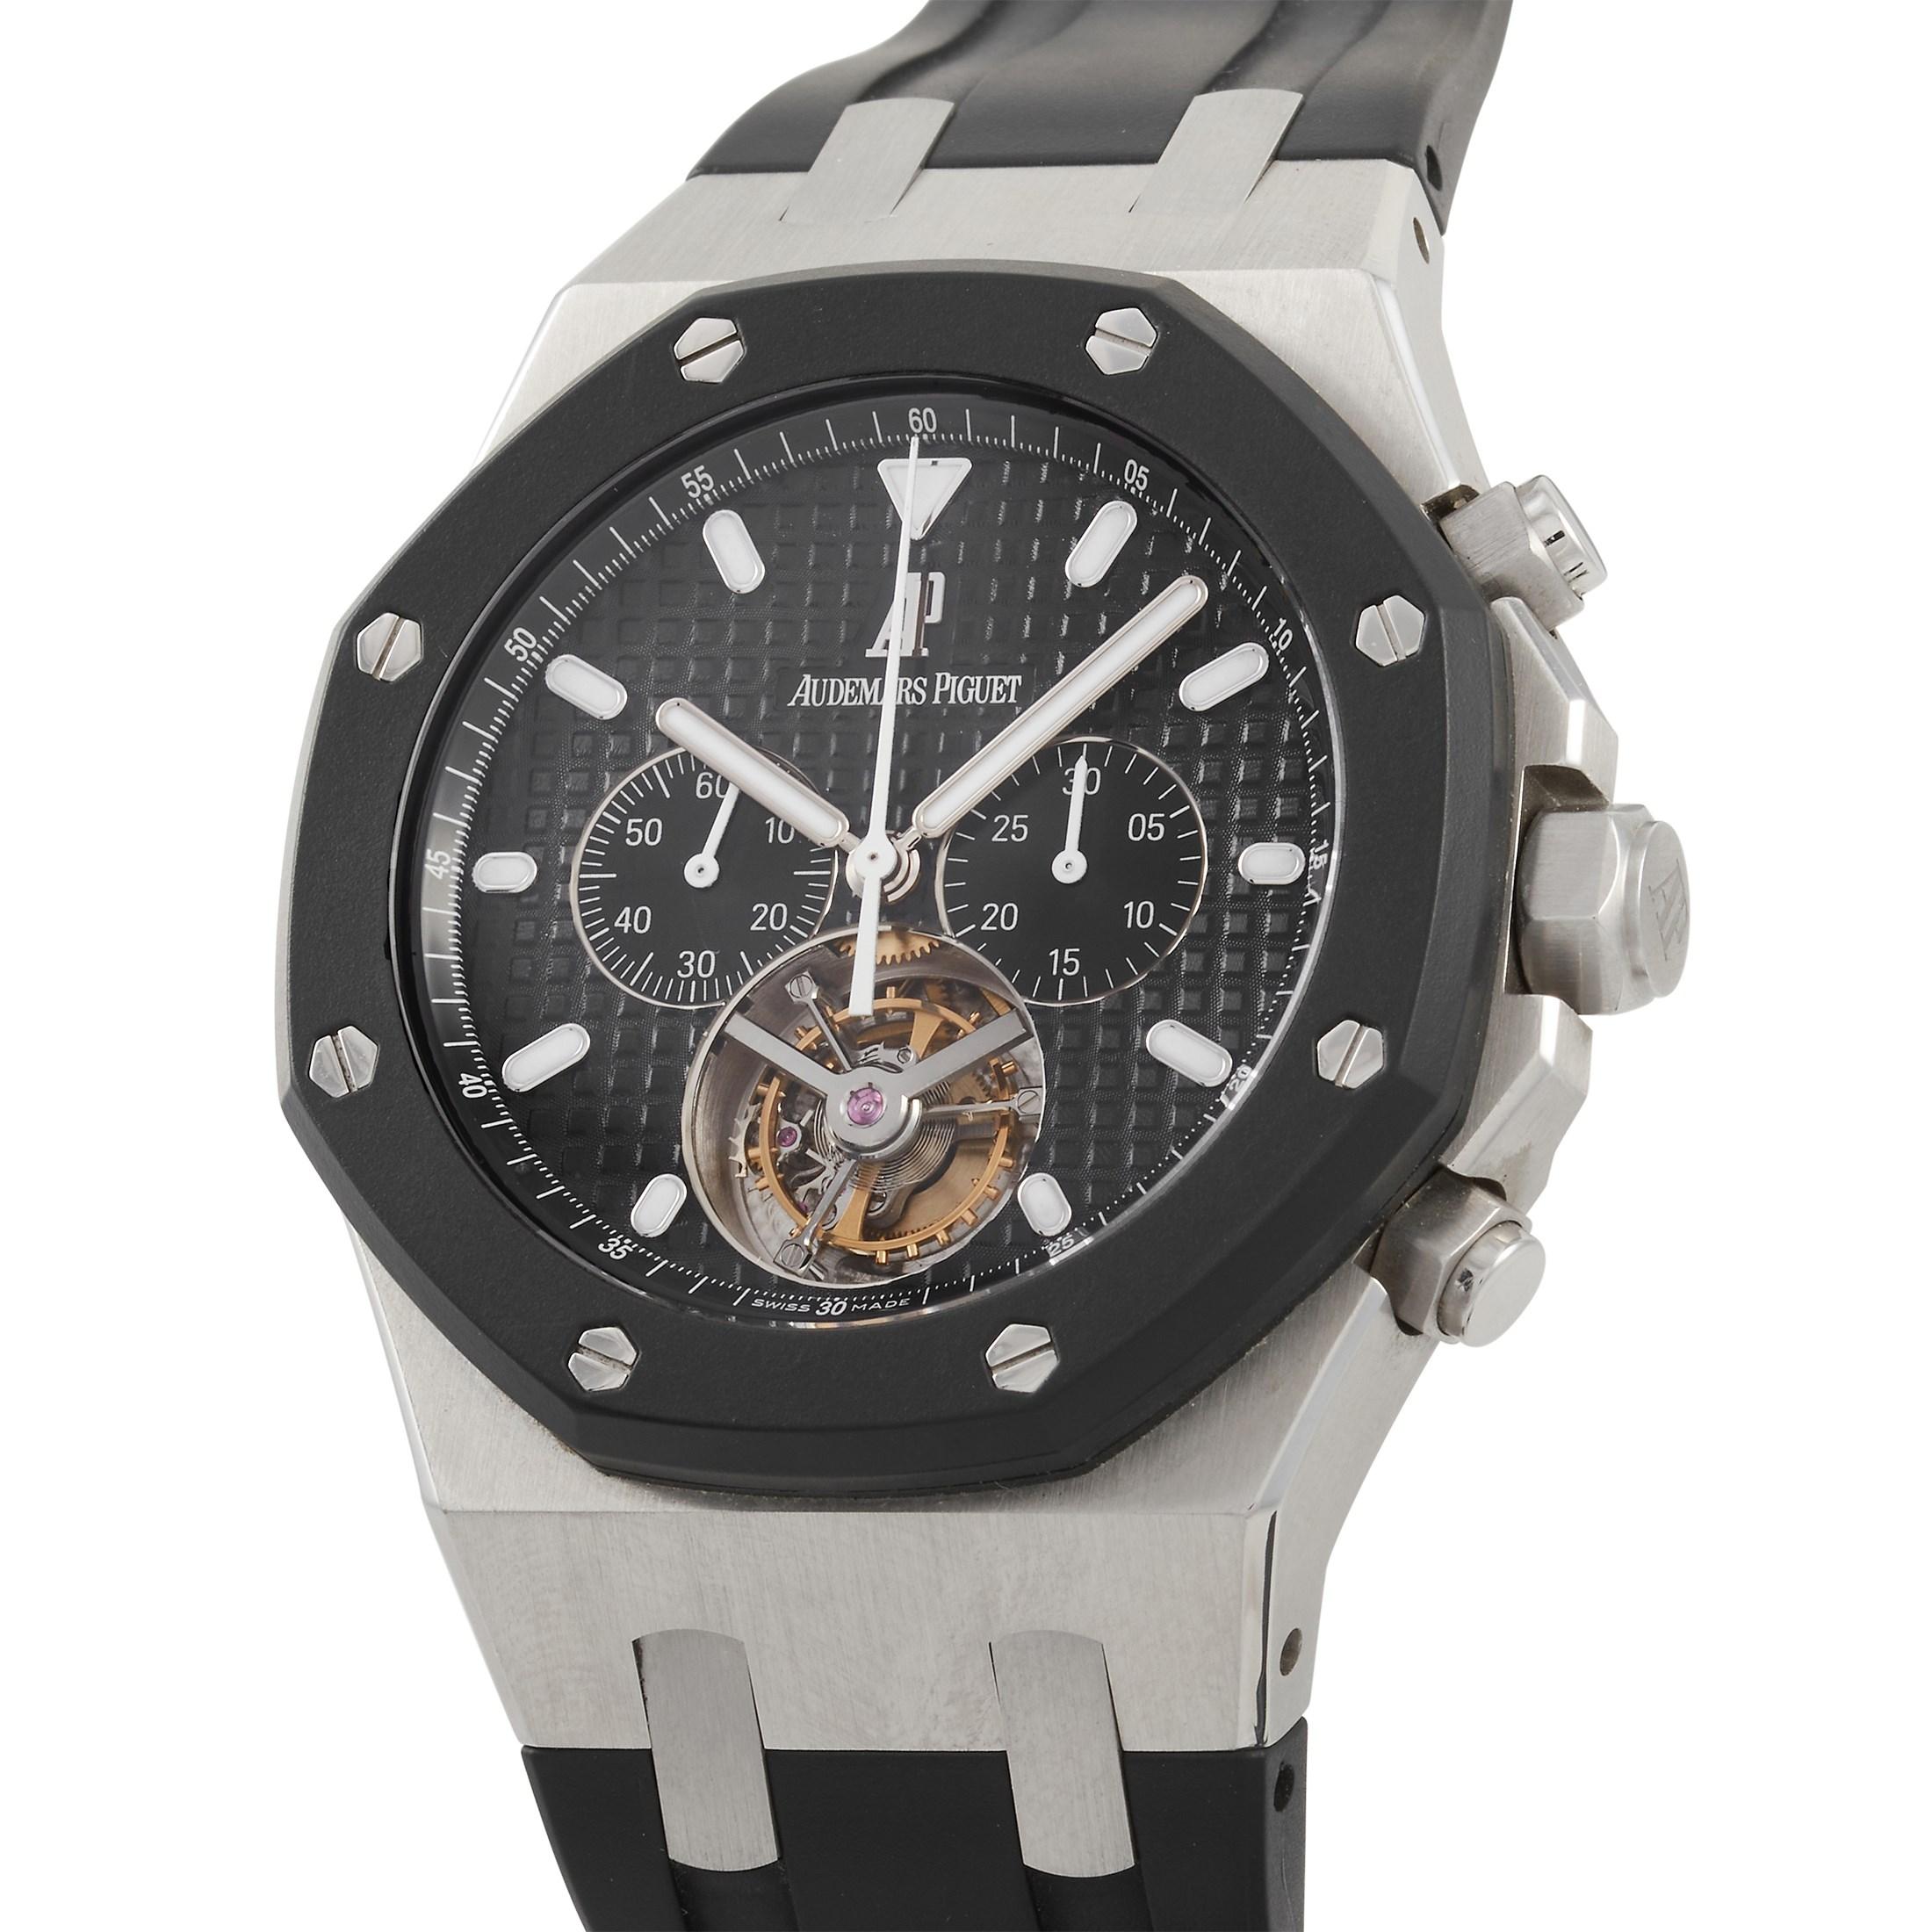 This Audemars Piguet Royal Oak Tourbillon Chronograph Stainless Steel 44 mm Watch, reference number 26377SK.OO.D002CA.01, features a stainless steel case measuring 44 mm in diameter with black bezel. The open case back offers a glimpse into the